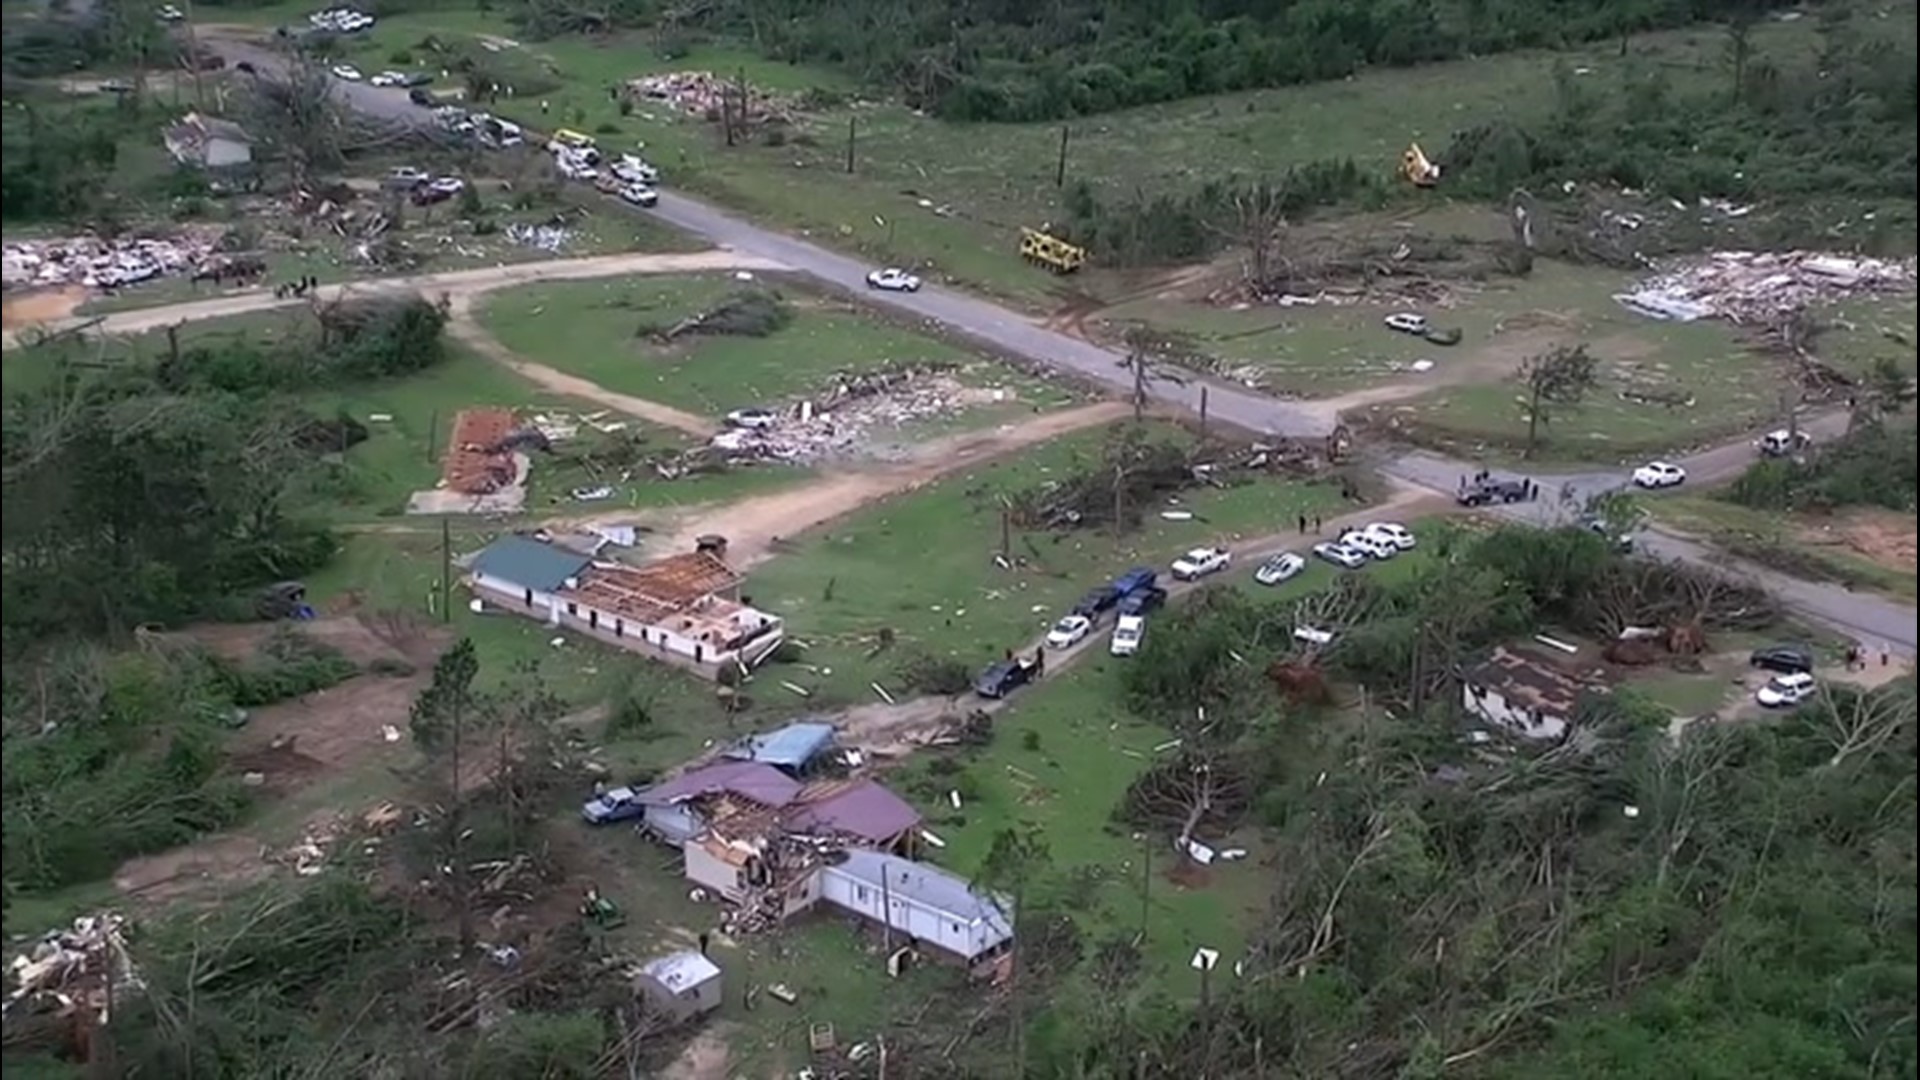 Drone footage captured on April 13, shows the destruction left behind by a tornado which hit Jefferson Davis County, Mississippi, on April 12.